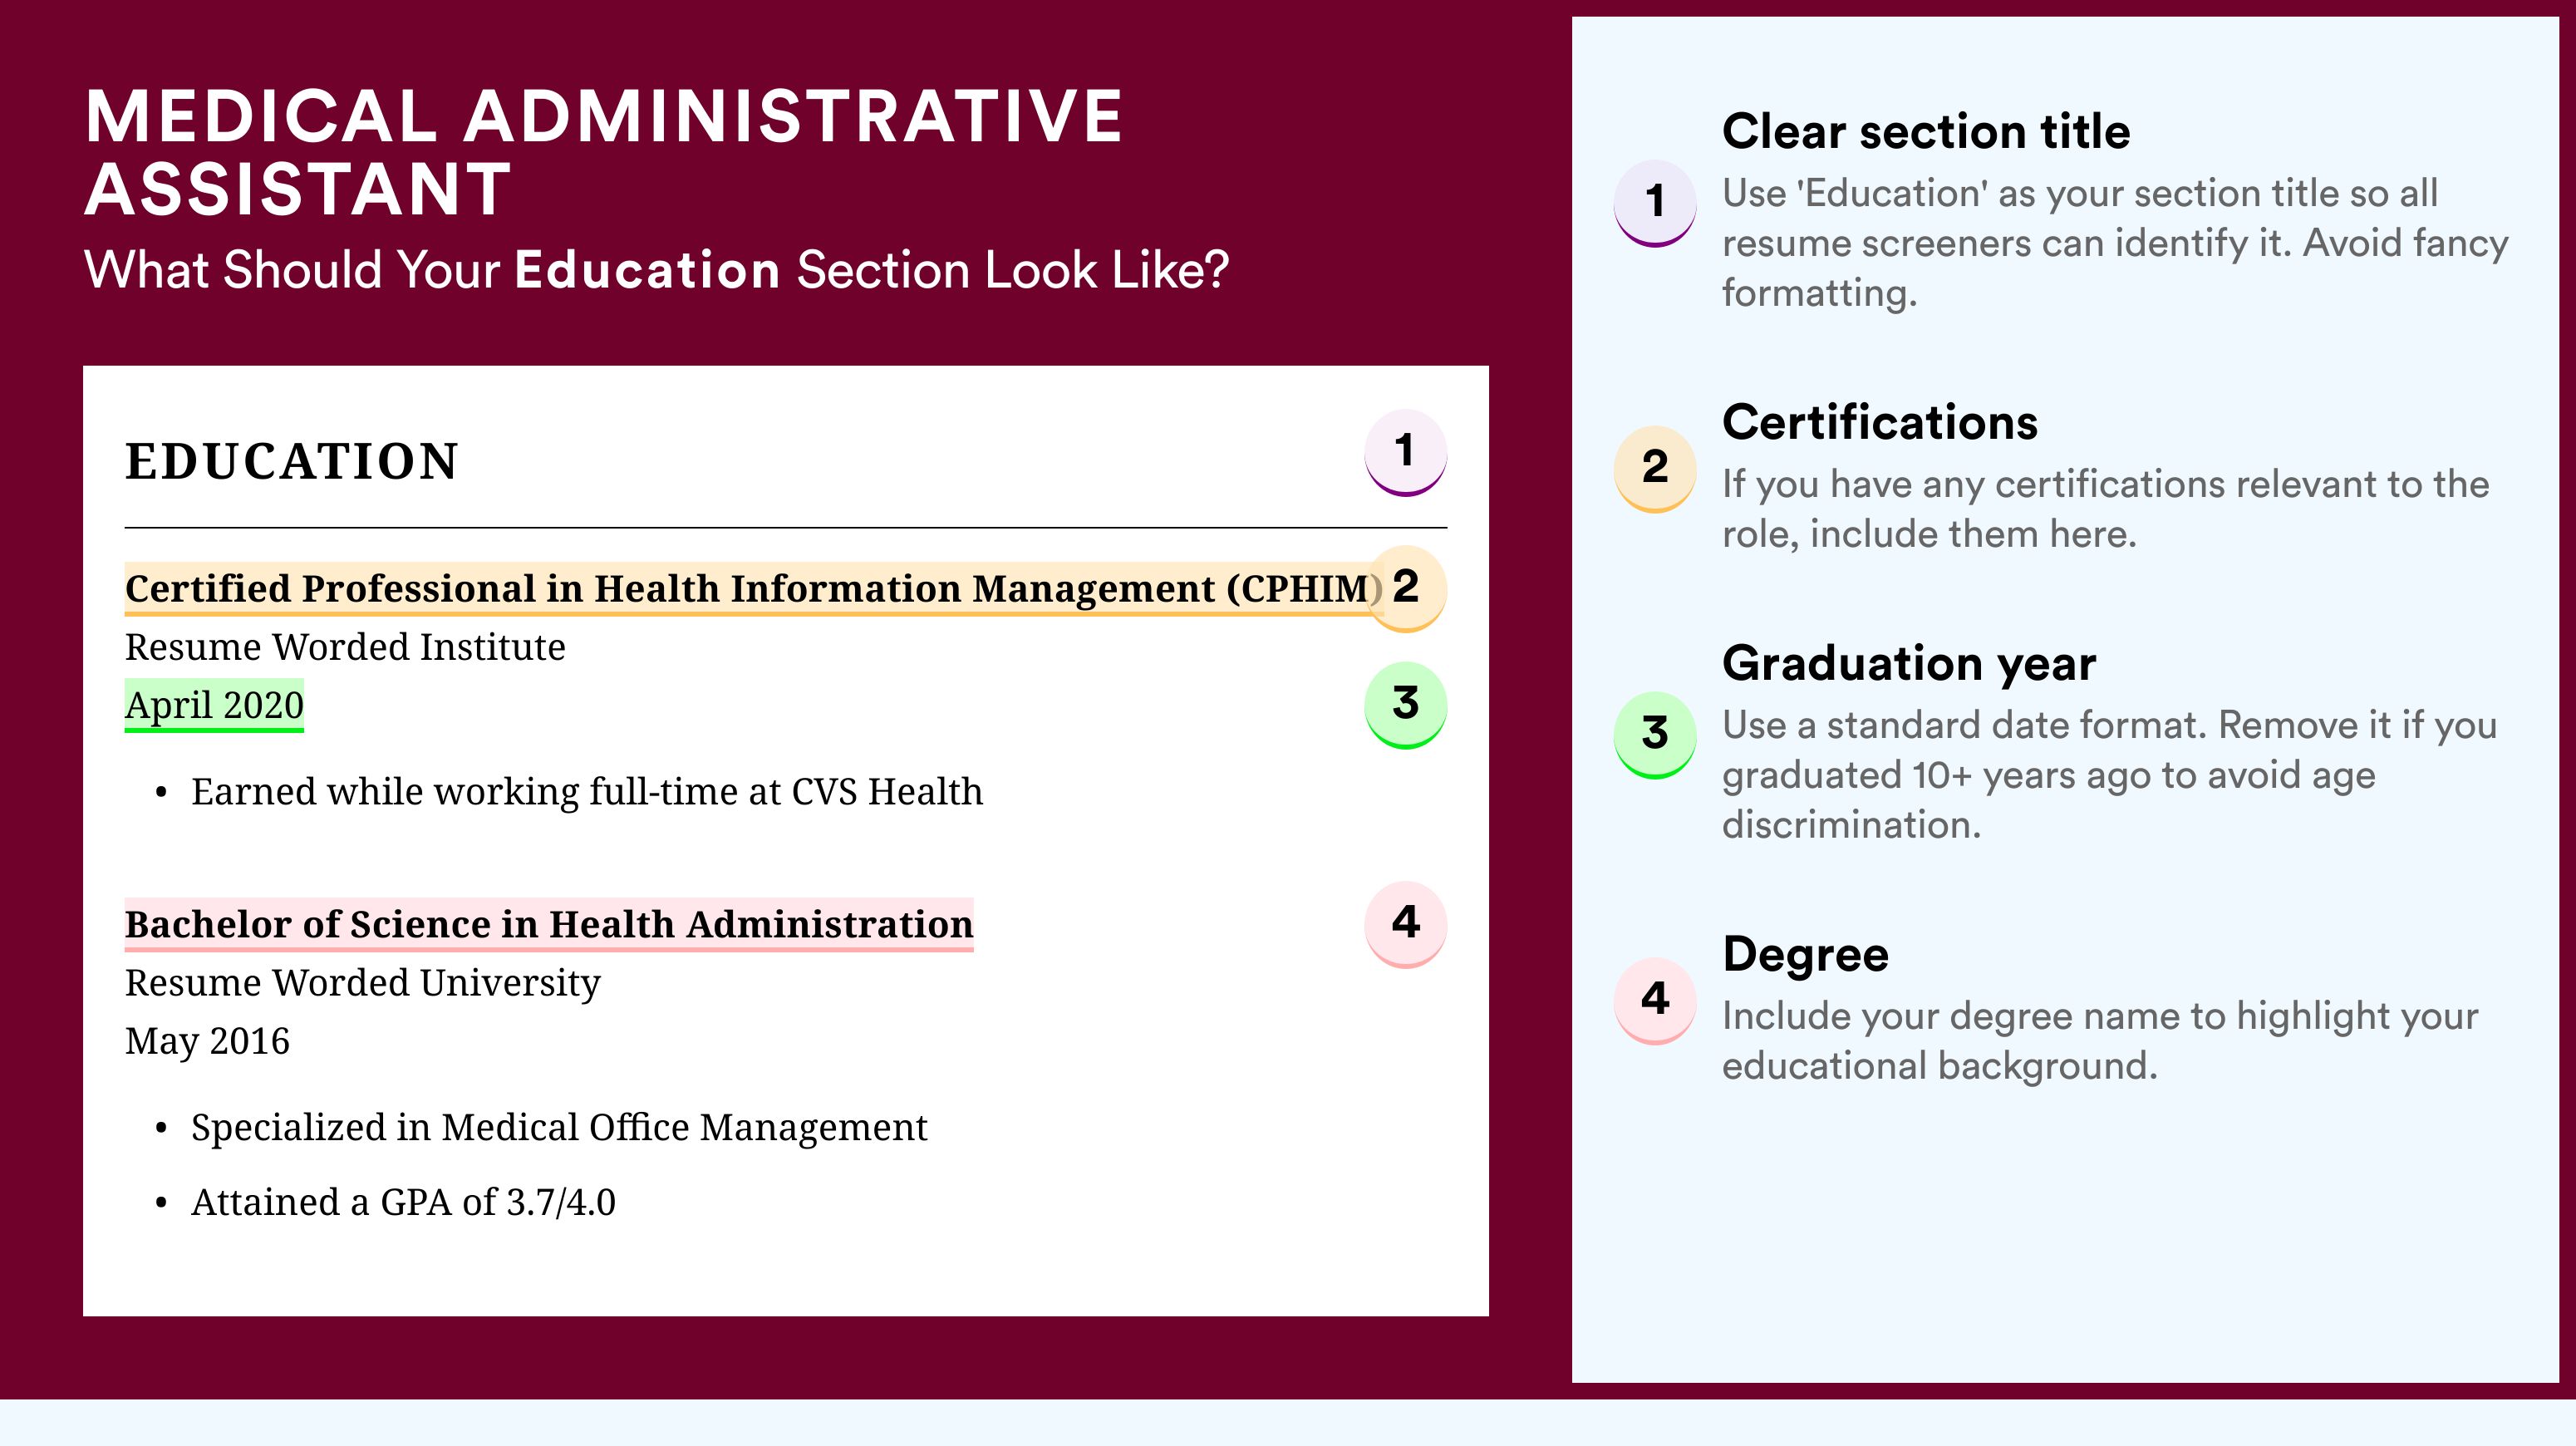 How To Write An Education Section - Medical Administrative Assistant Roles